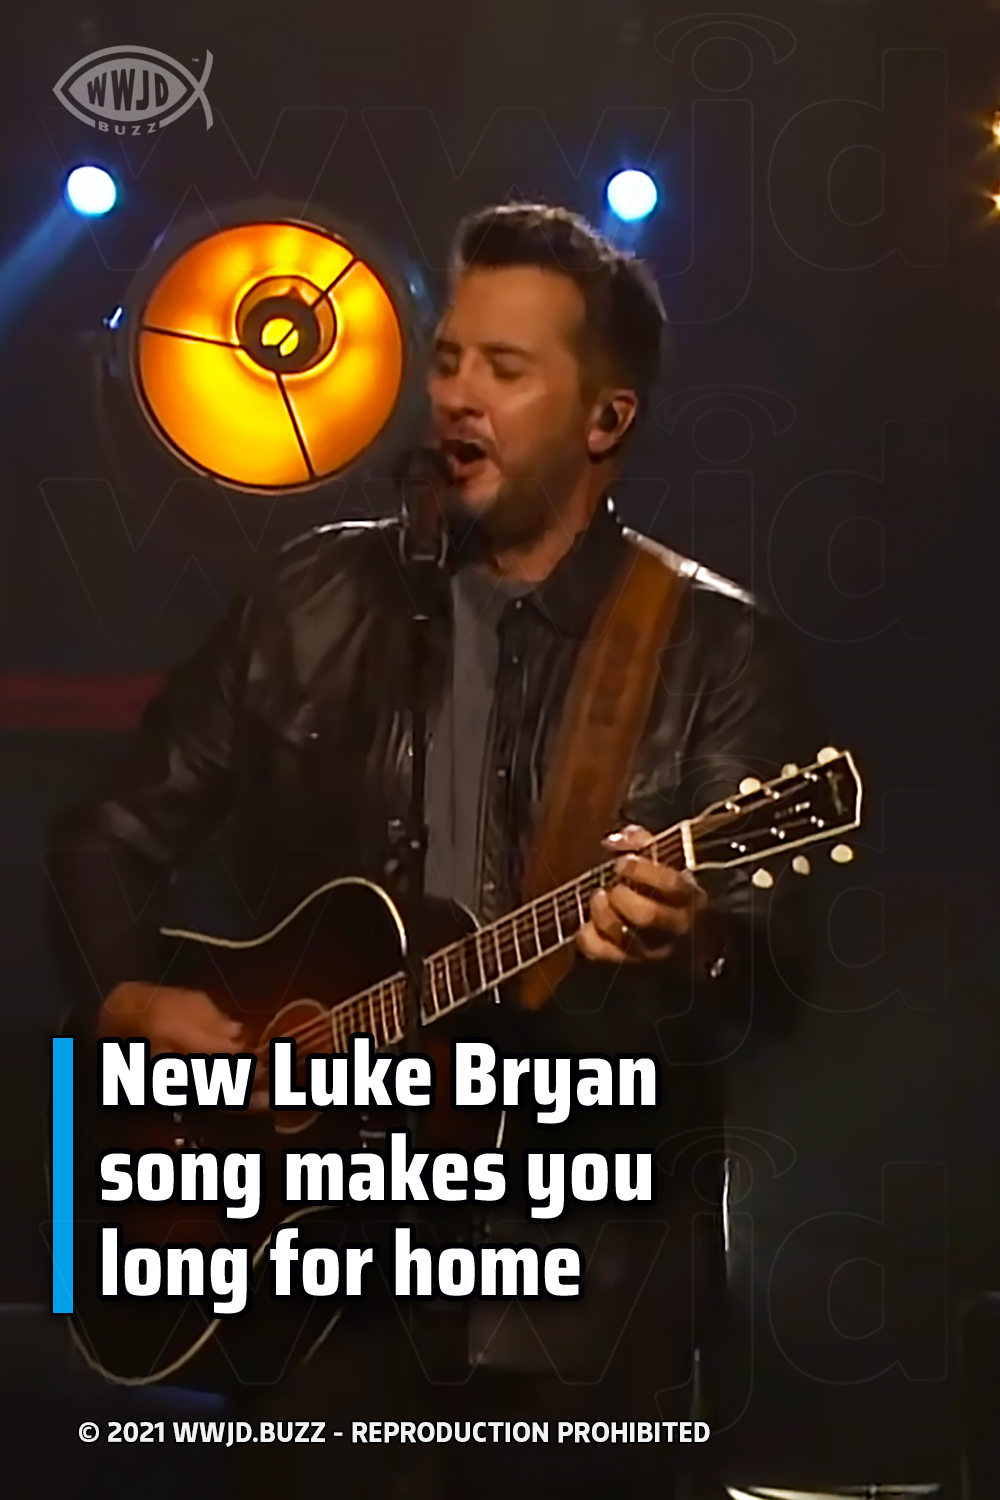 New Luke Bryan song makes you long for home